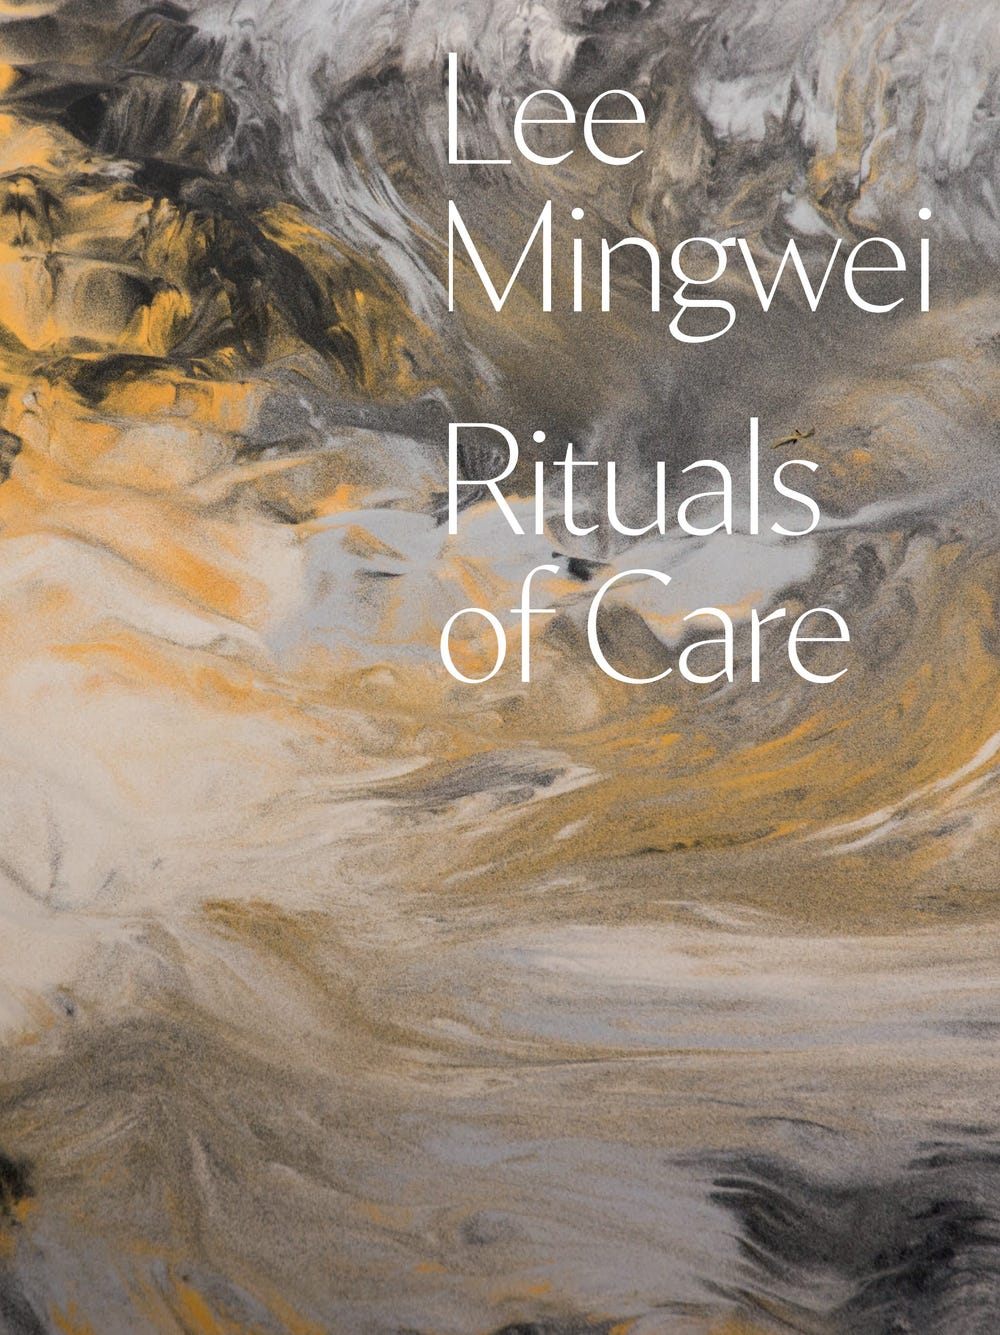 Lee Mingwei catalogue cover